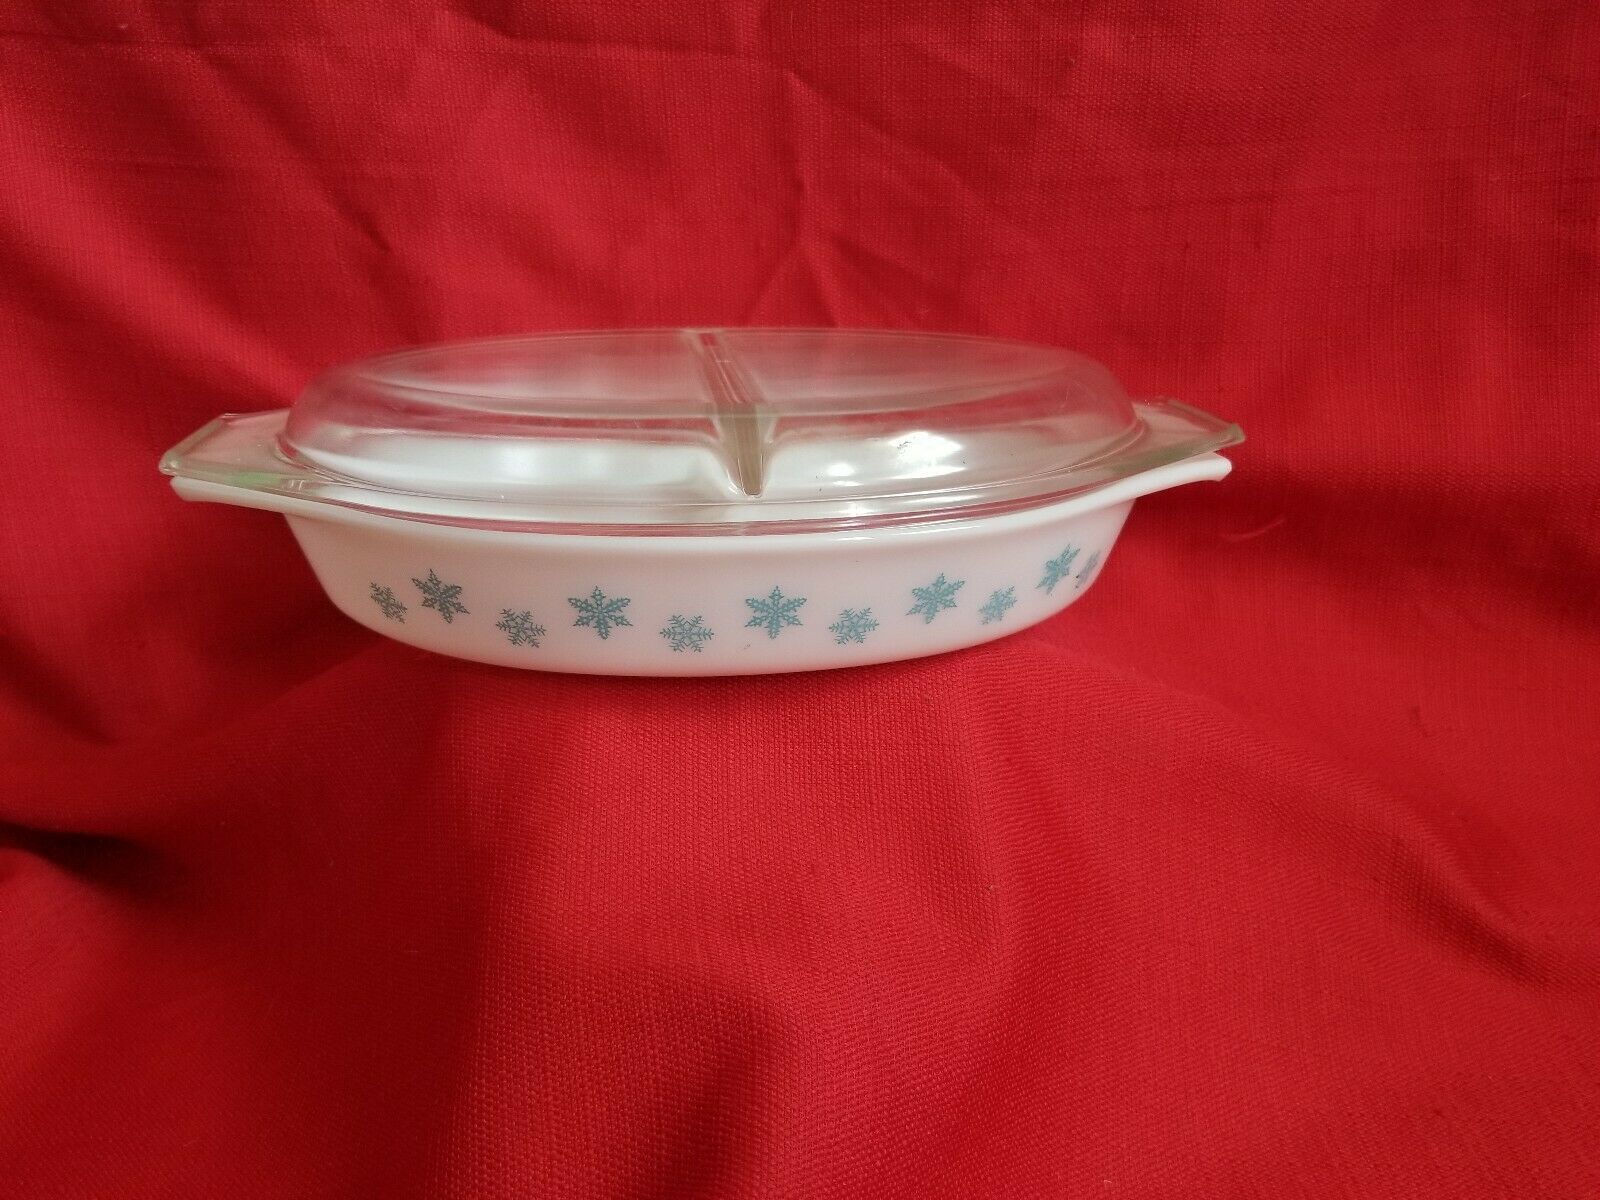 Primary image for Vintage Pyrex Divided 1.5qt Casserole Dish in Snowflake Pattern blue